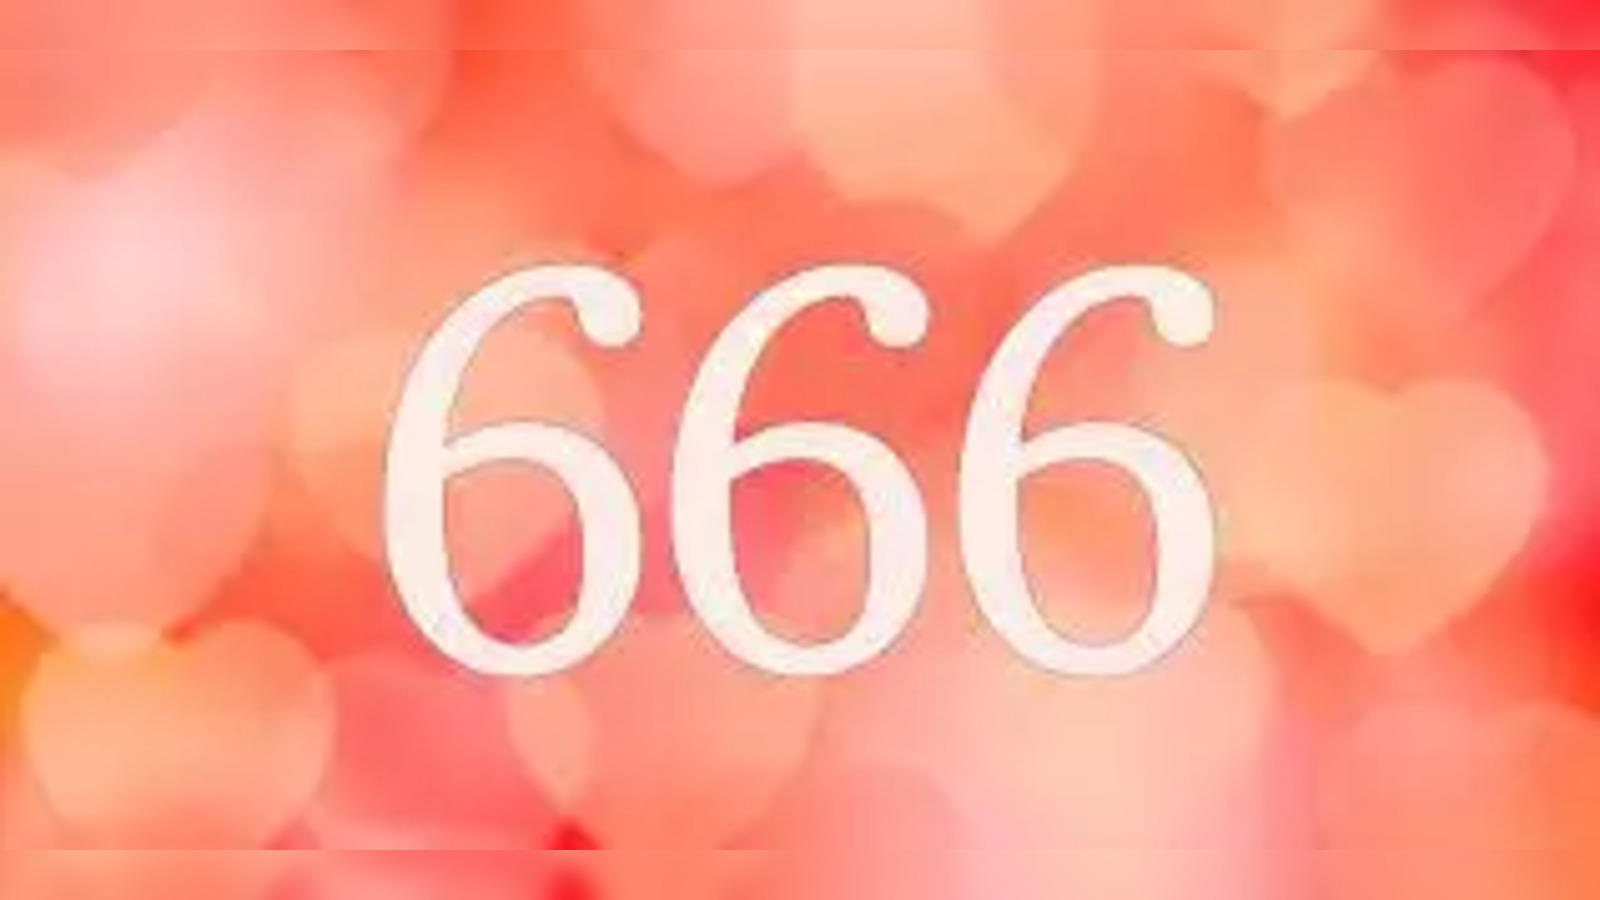 Seeing Angel Number 666 quite often? Here's what it means in